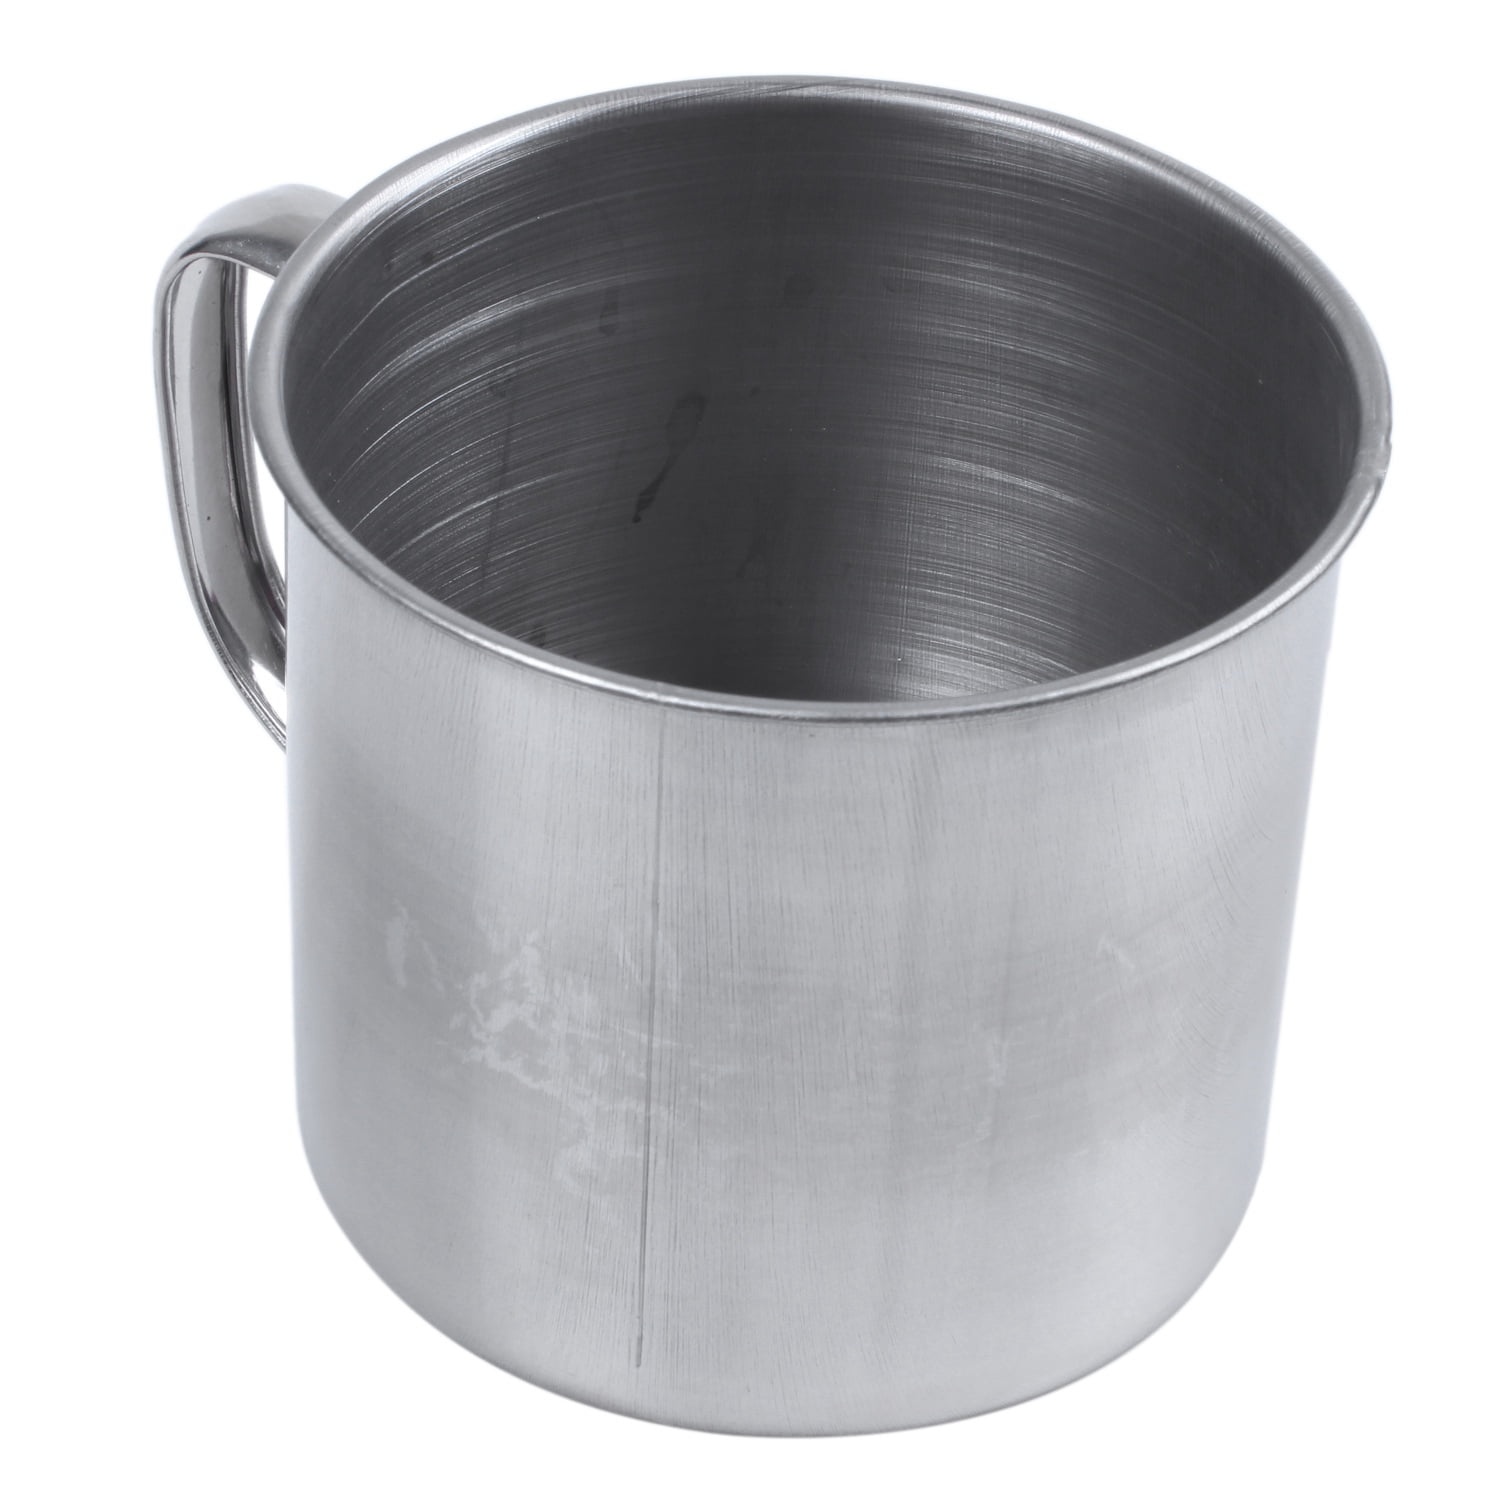 Stainless Steel Coffee Tea Mug Cup-Camping/Travel 3.5  Hot G$ 